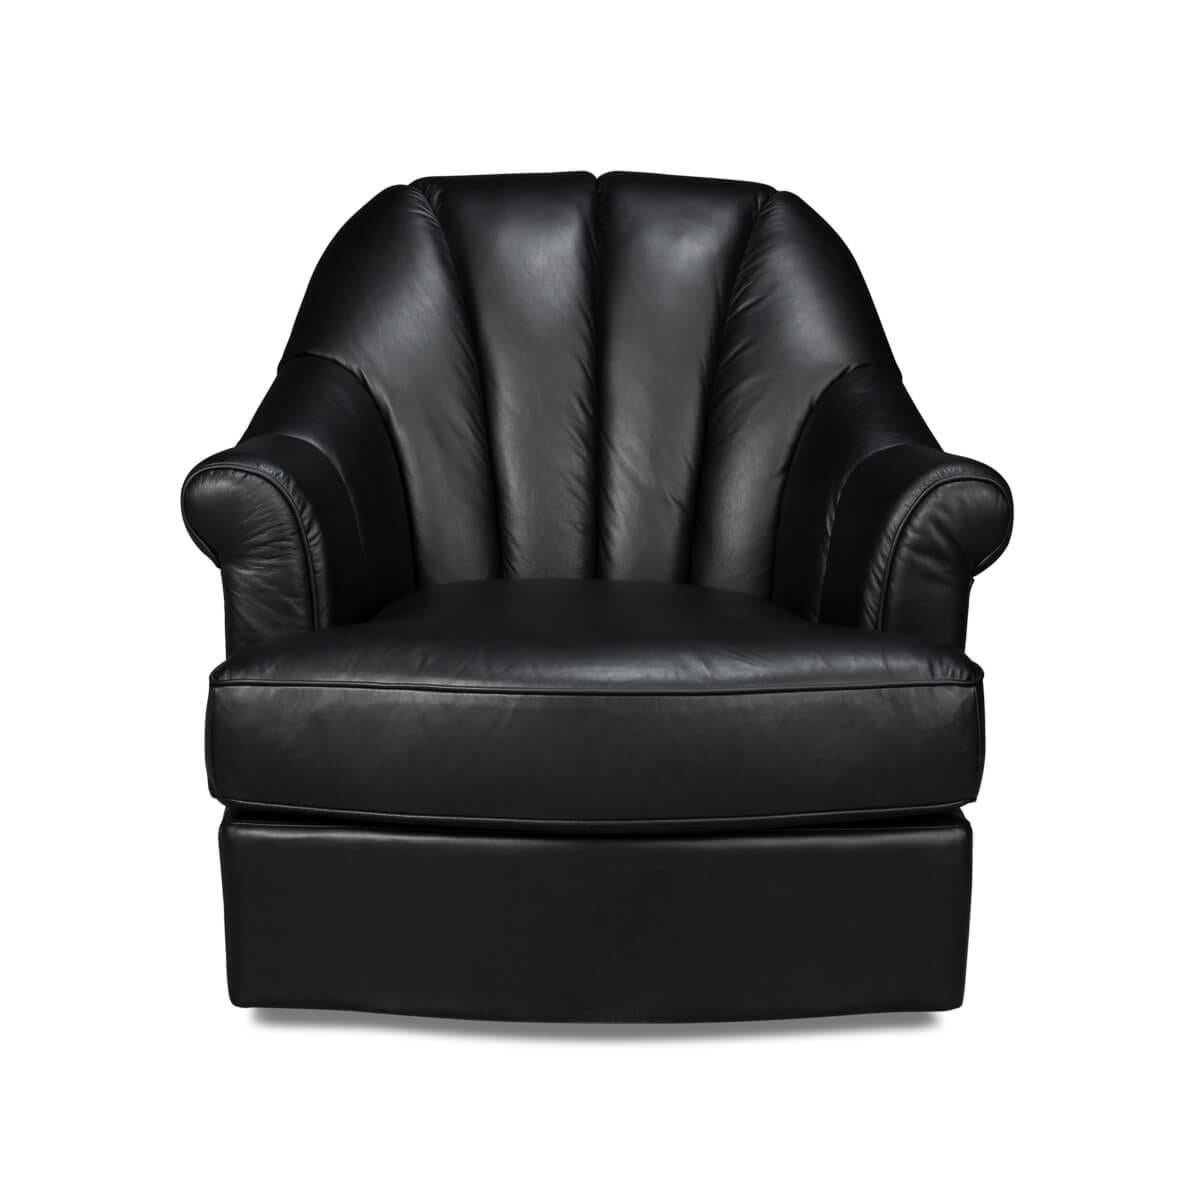 
A haven of relaxation where classic design meets cloud-like comfort. With its generously padded, rolled armrests and deep, inviting seat cushion, this chair is a call to leisure, crafted in premium full-grain leather that exudes warmth and